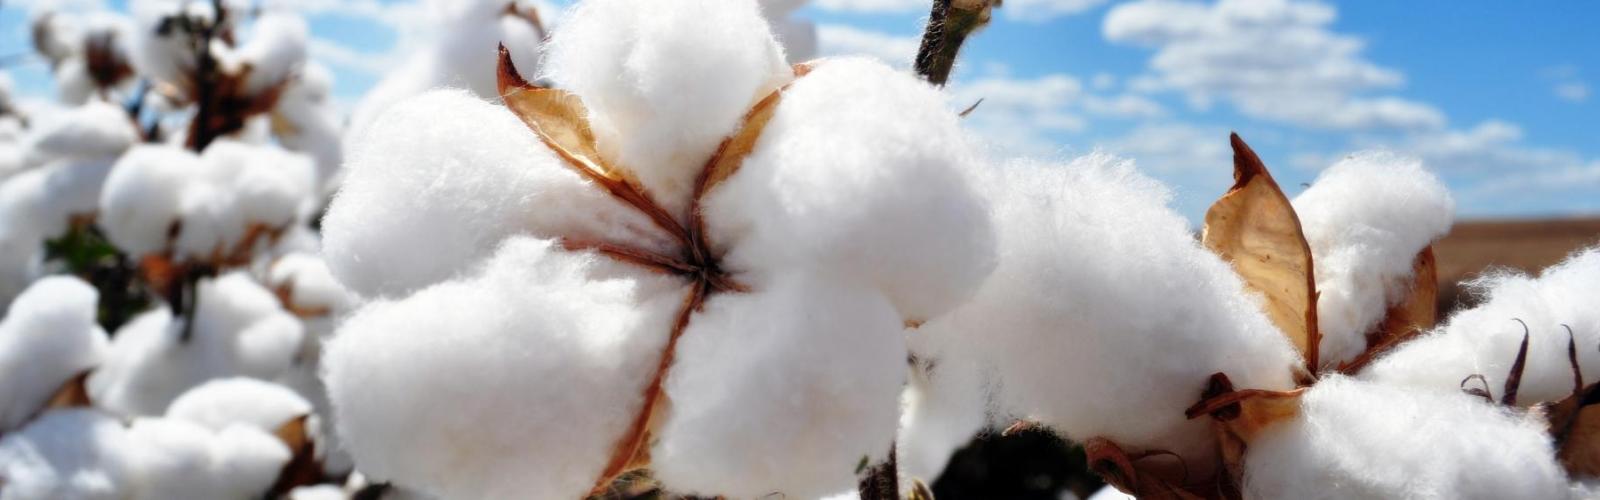 Close up image of an open white cotton boll ready for harvest, with other cotton bolls and a blue sky in the background